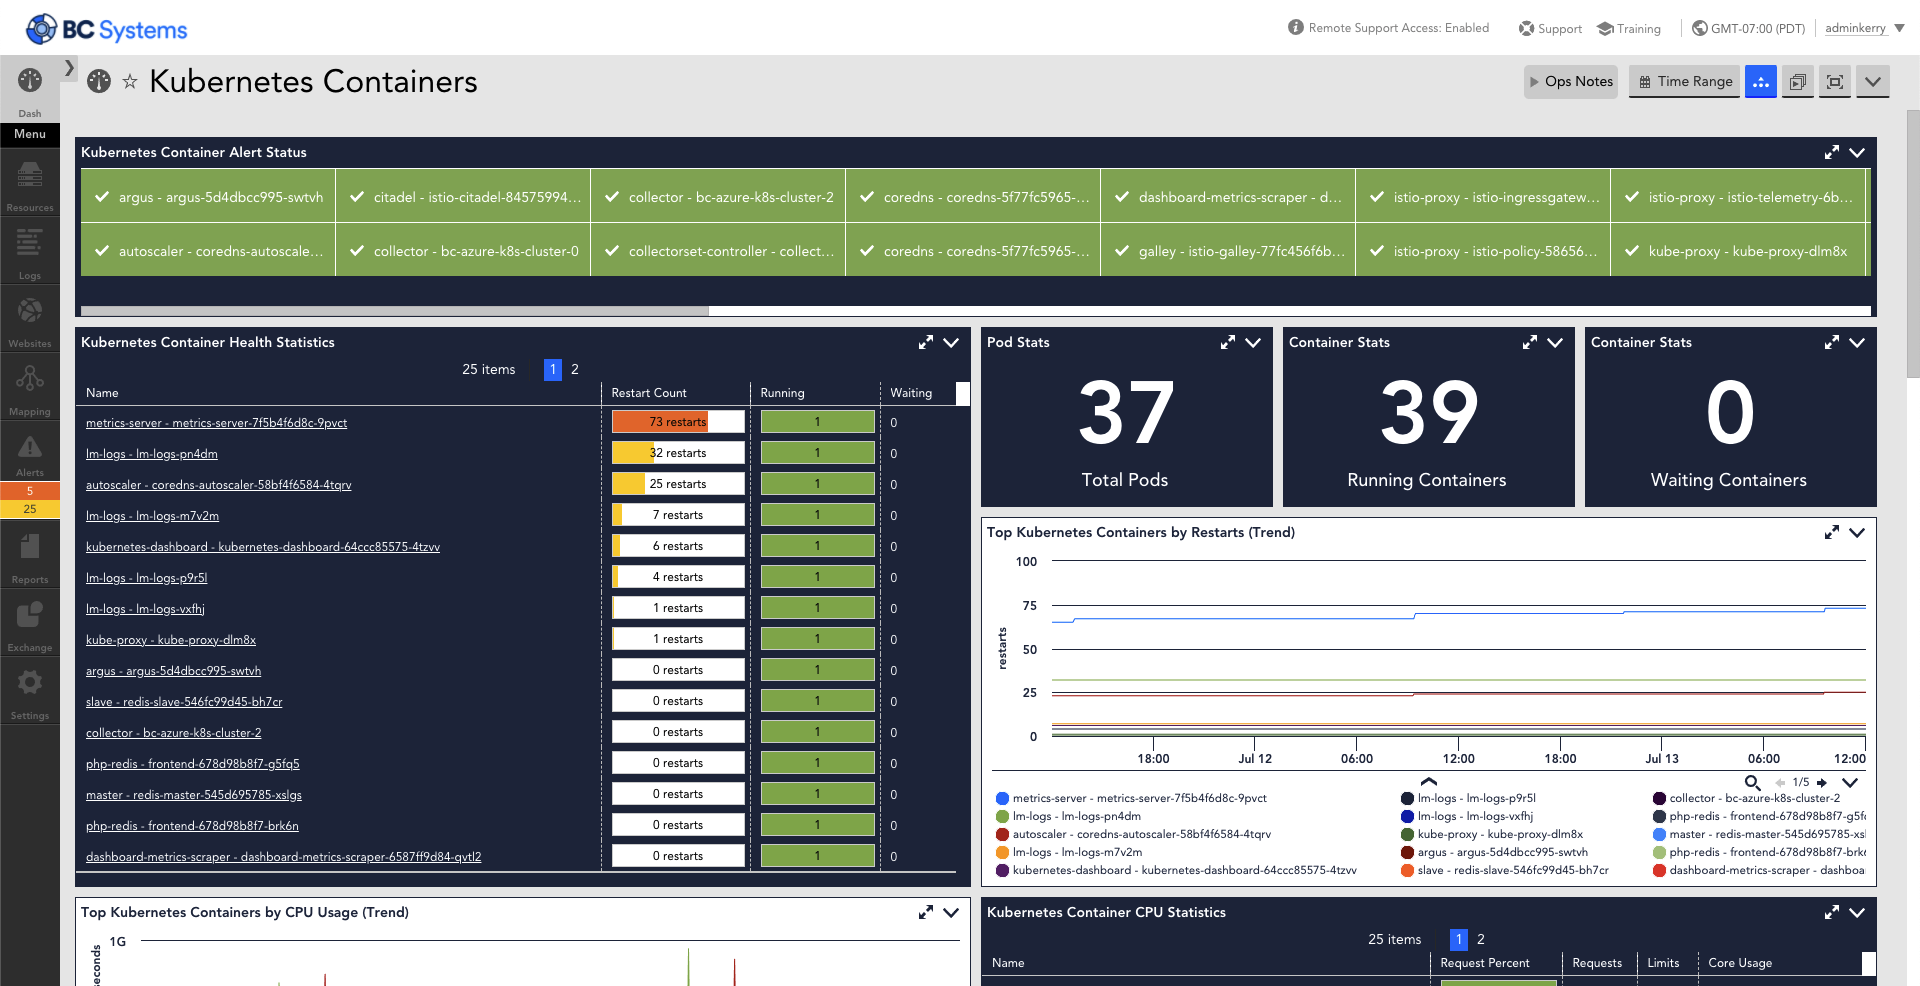 This dashboard provides various metrics that are monitored for Kubernetes Containers using the Kubernetes cluster API.